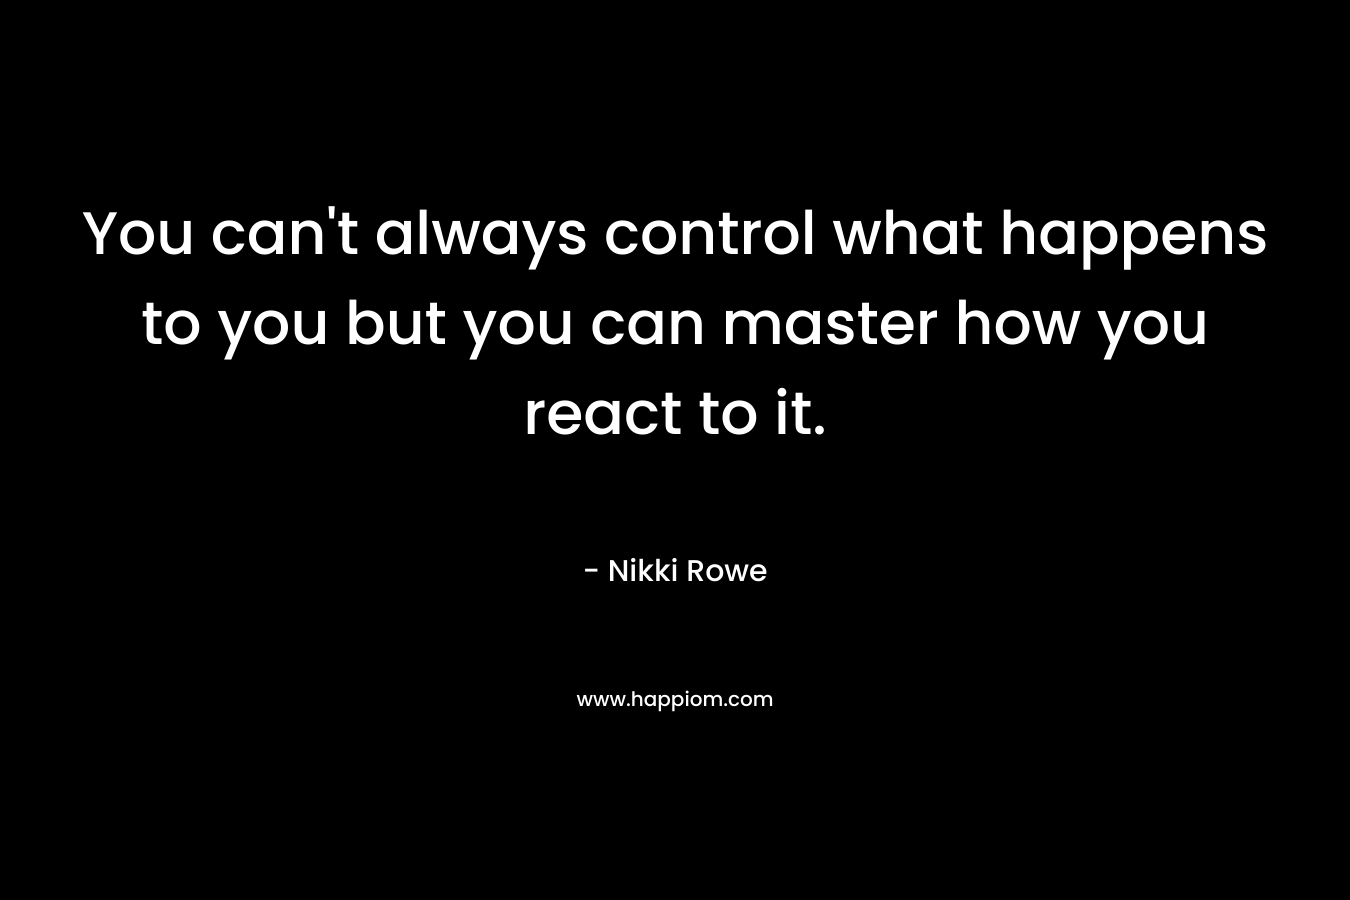 You can't always control what happens to you but you can master how you react to it.